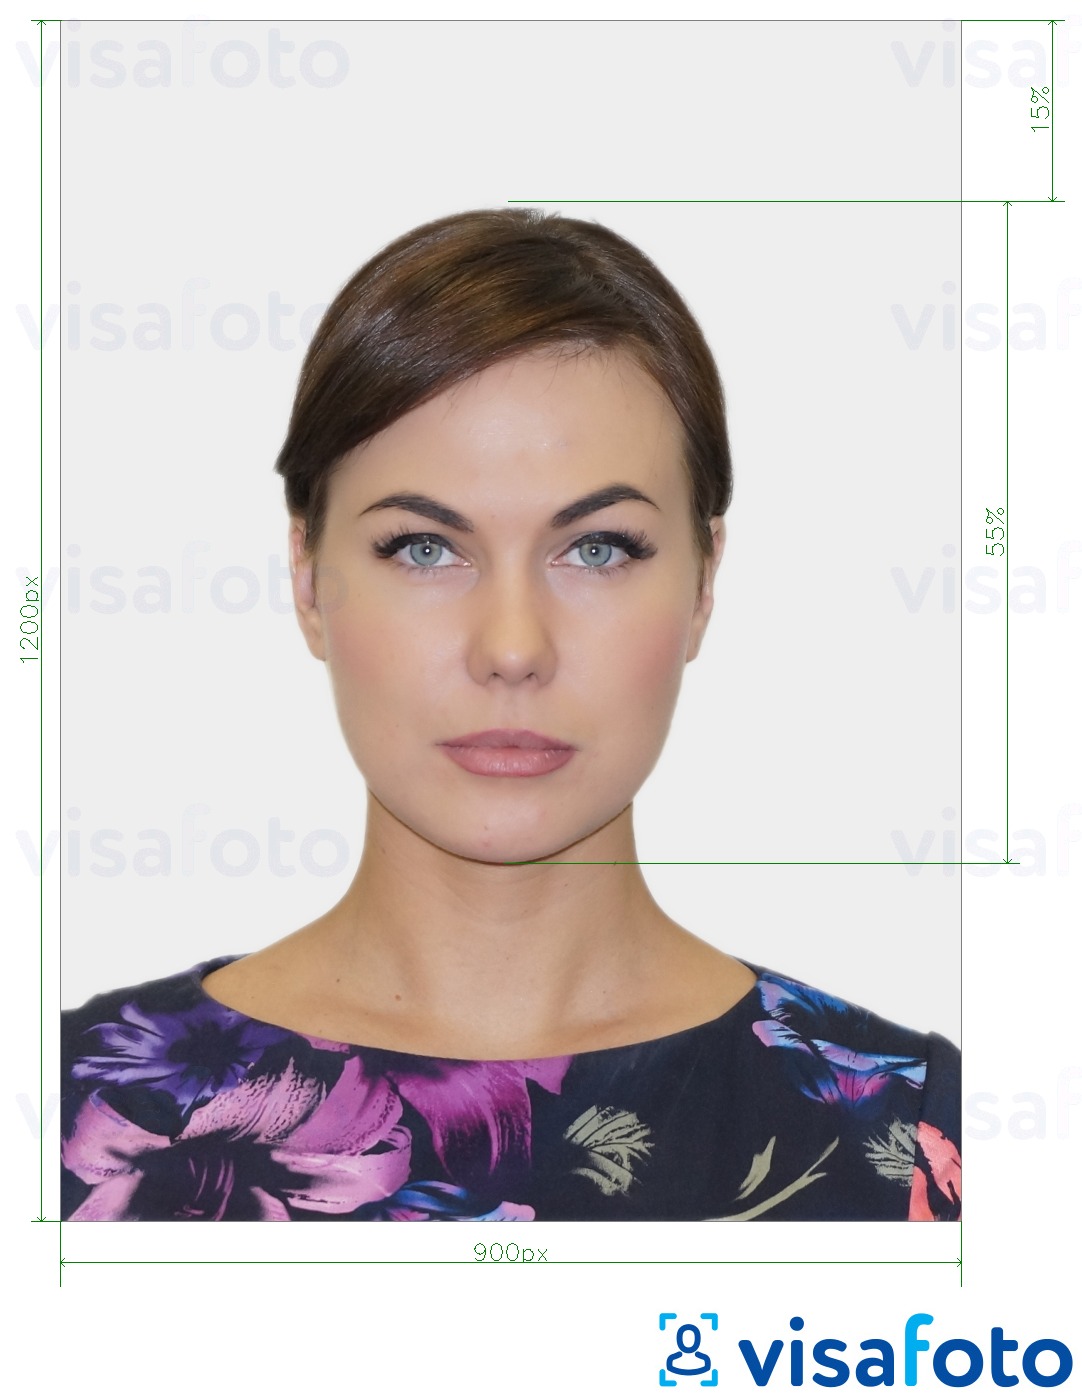 Example of photo for UK child passport online with exact size specification